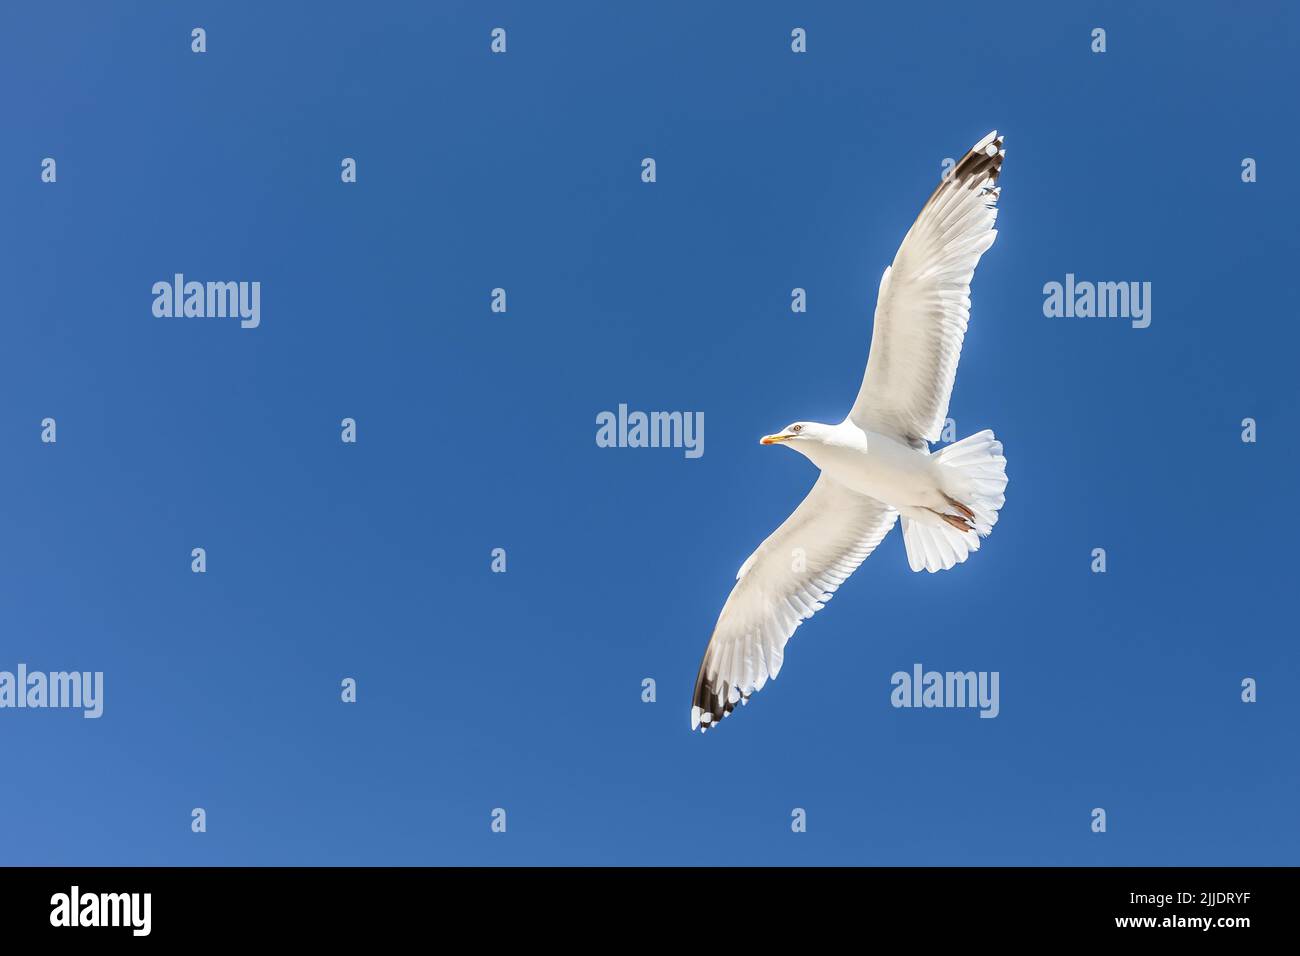 white seagull flies in front of blue sky Stock Photo